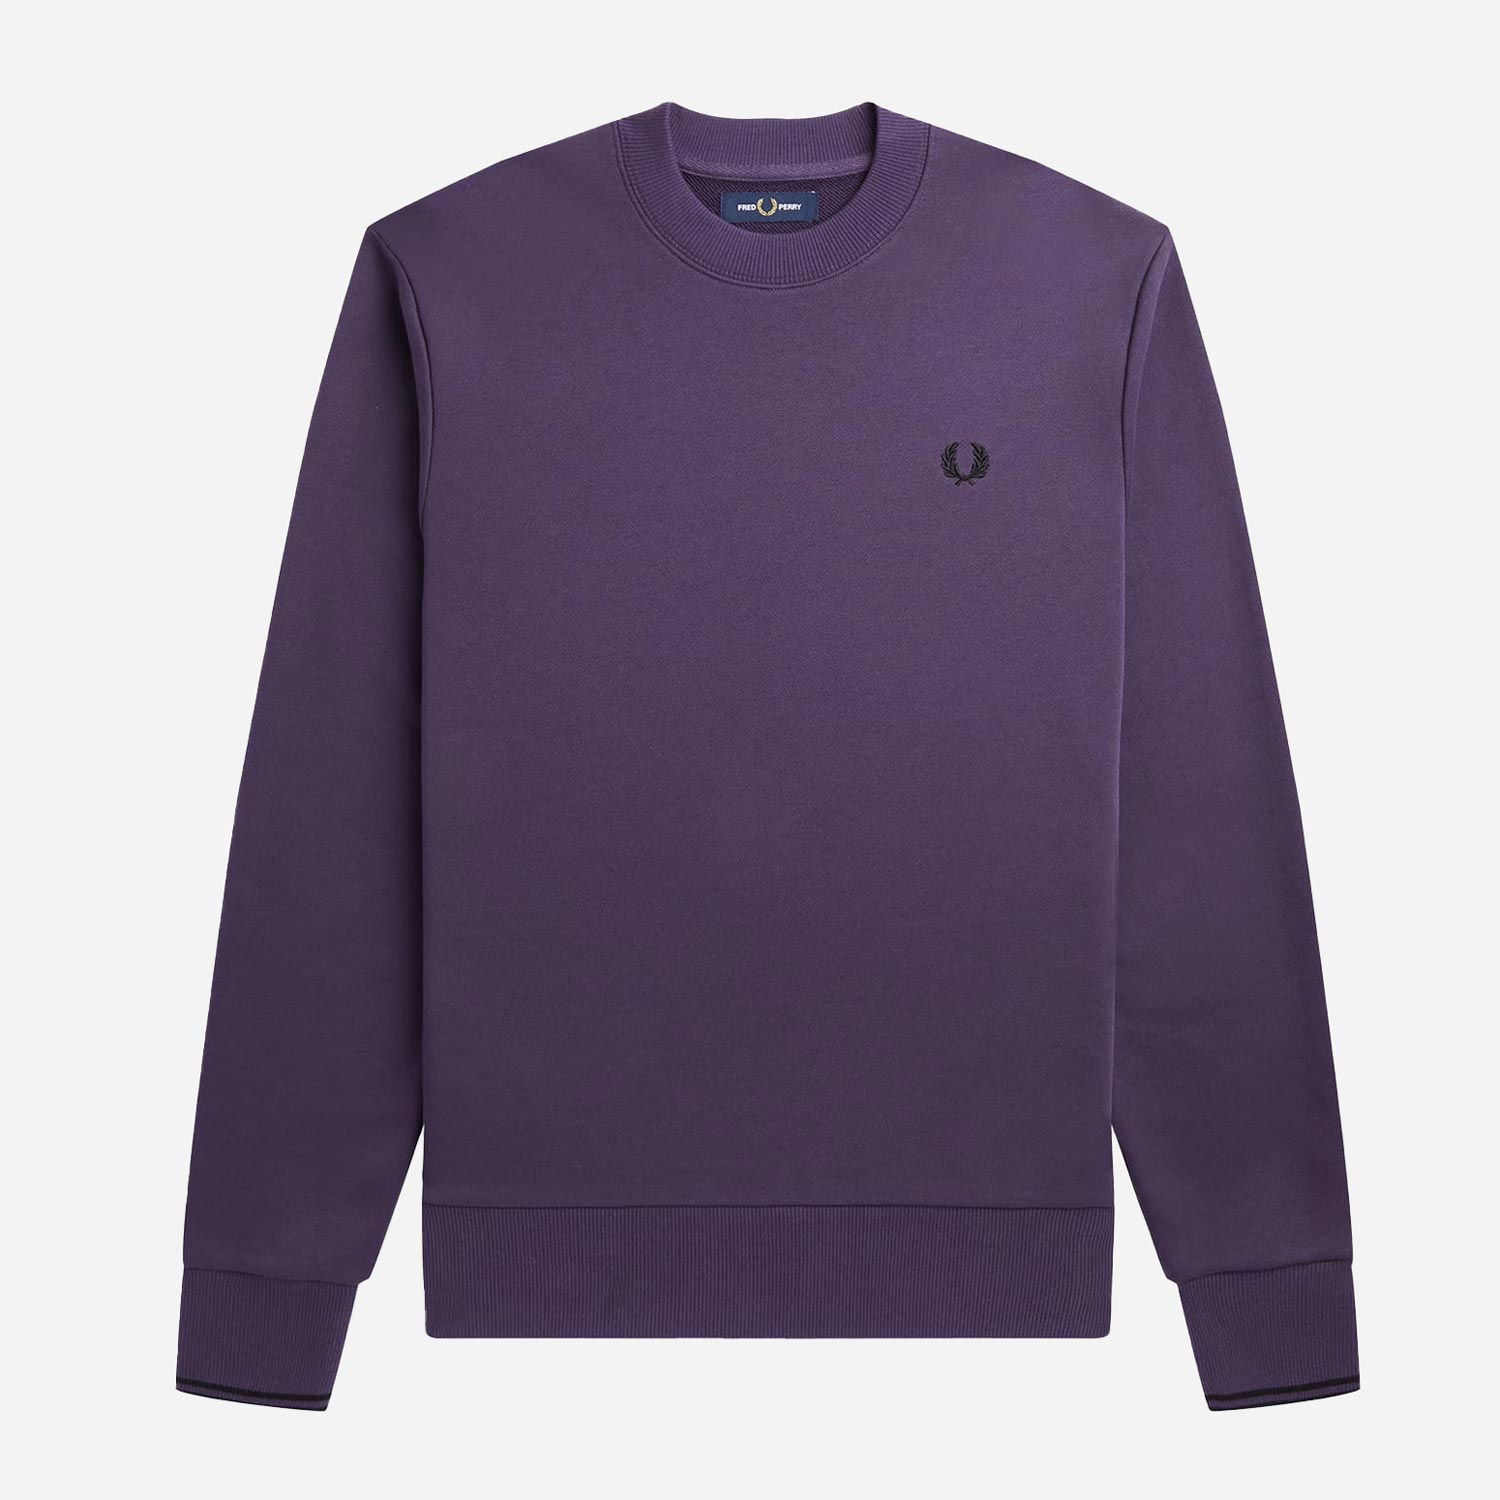 Fred Perry | The Cream Store | Polo Shirts, Jackets, T-Shirts | UK